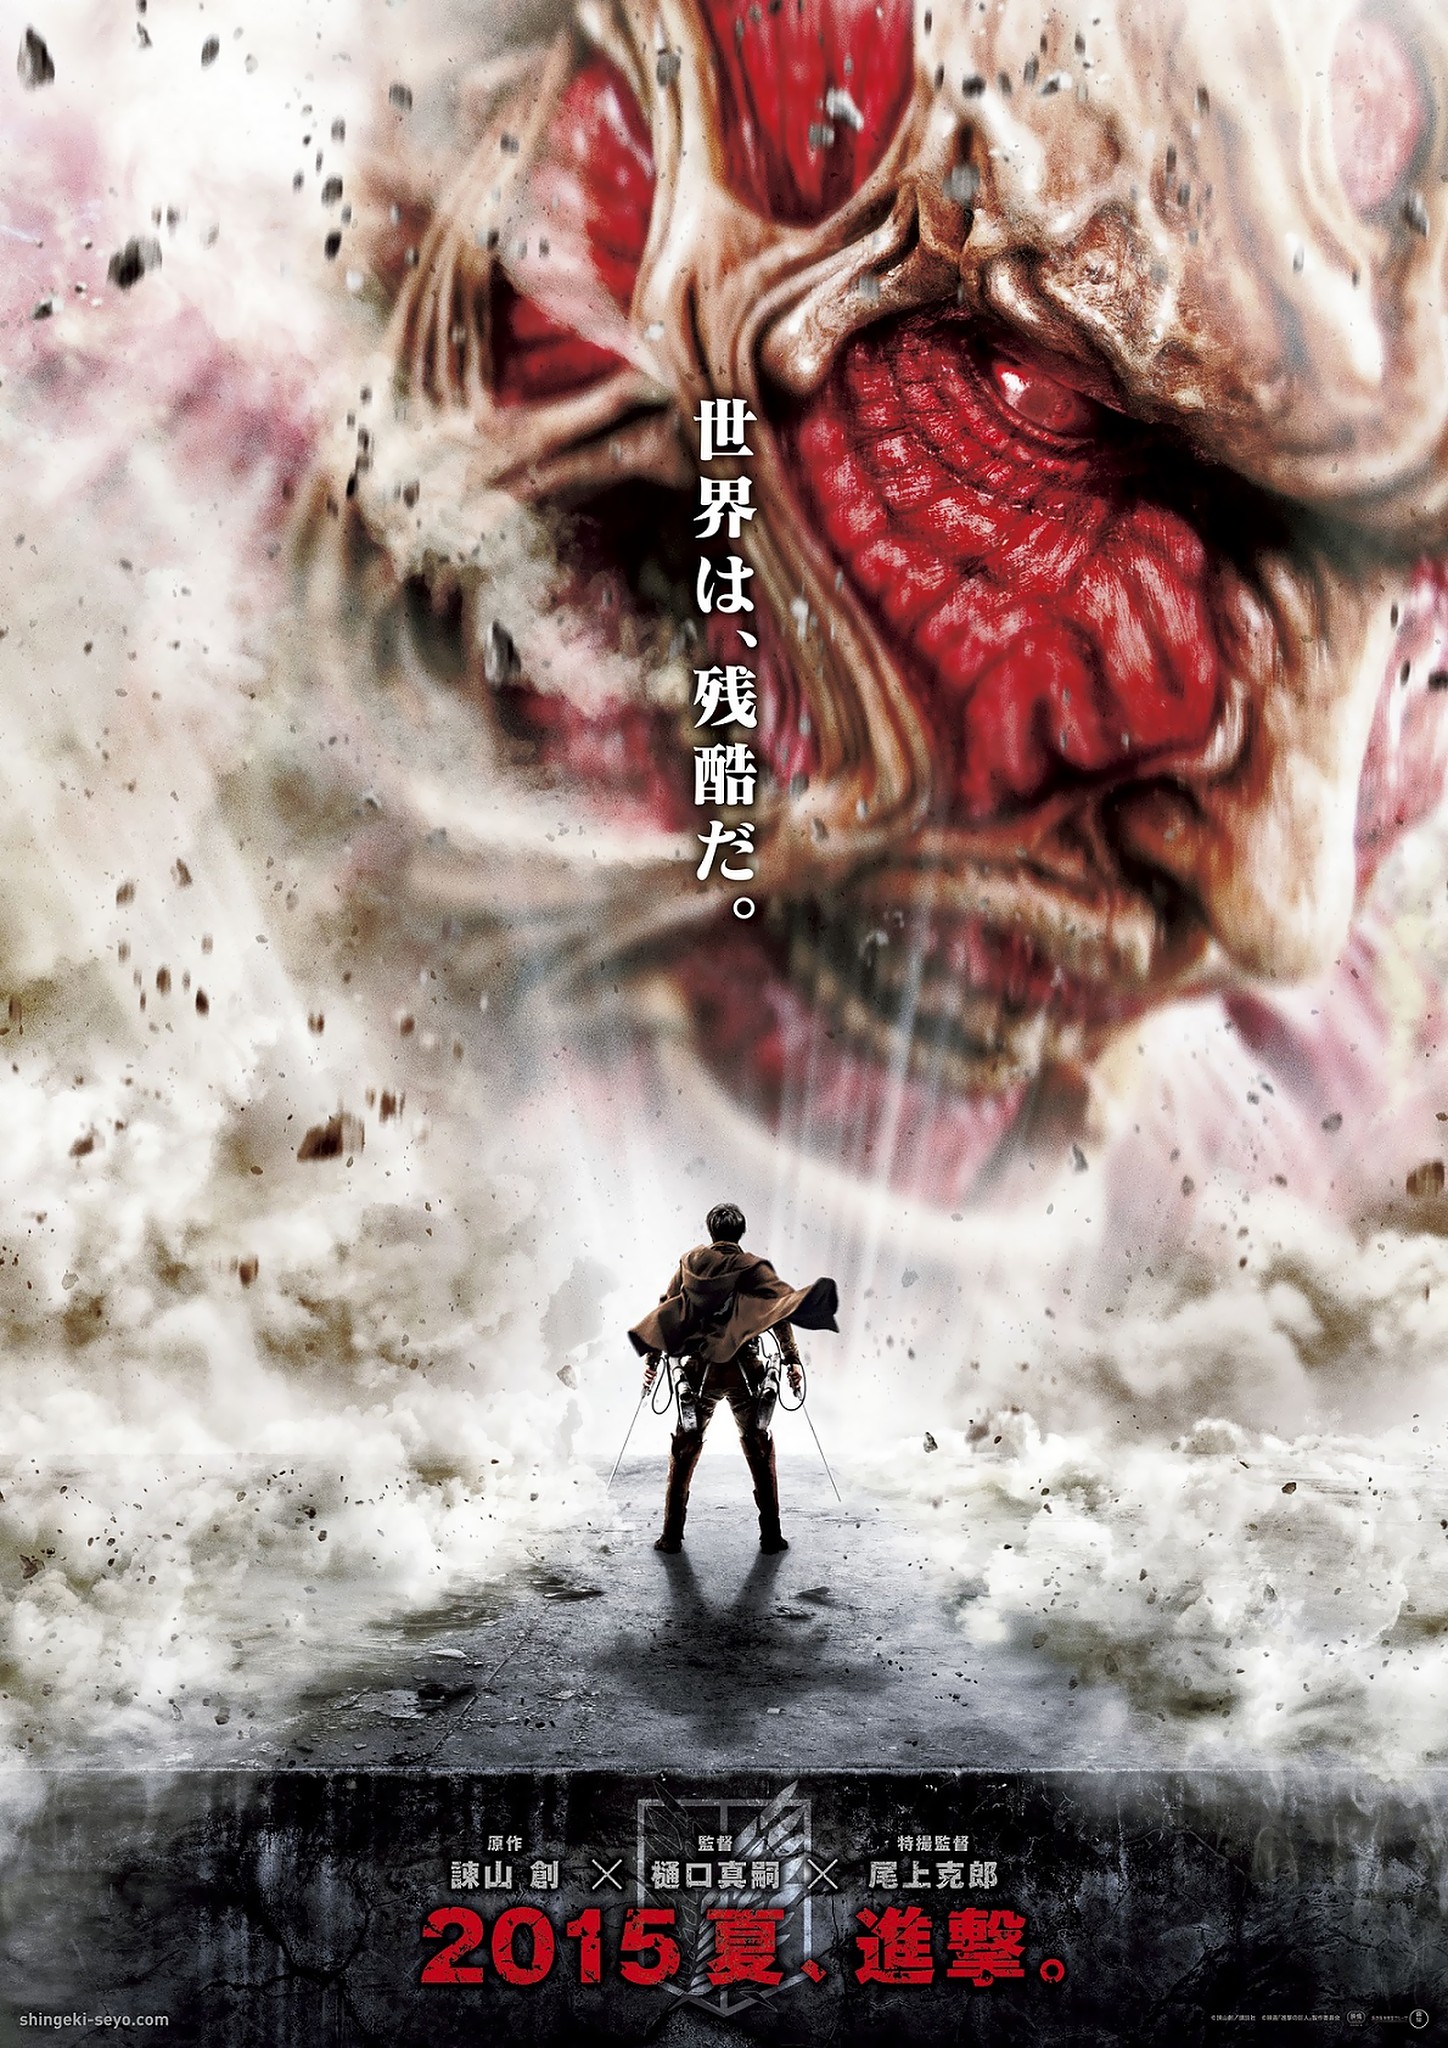 Attack On Titan 5 Things The LiveAction Movies Got Right  5 Things That  The Anime Did Better